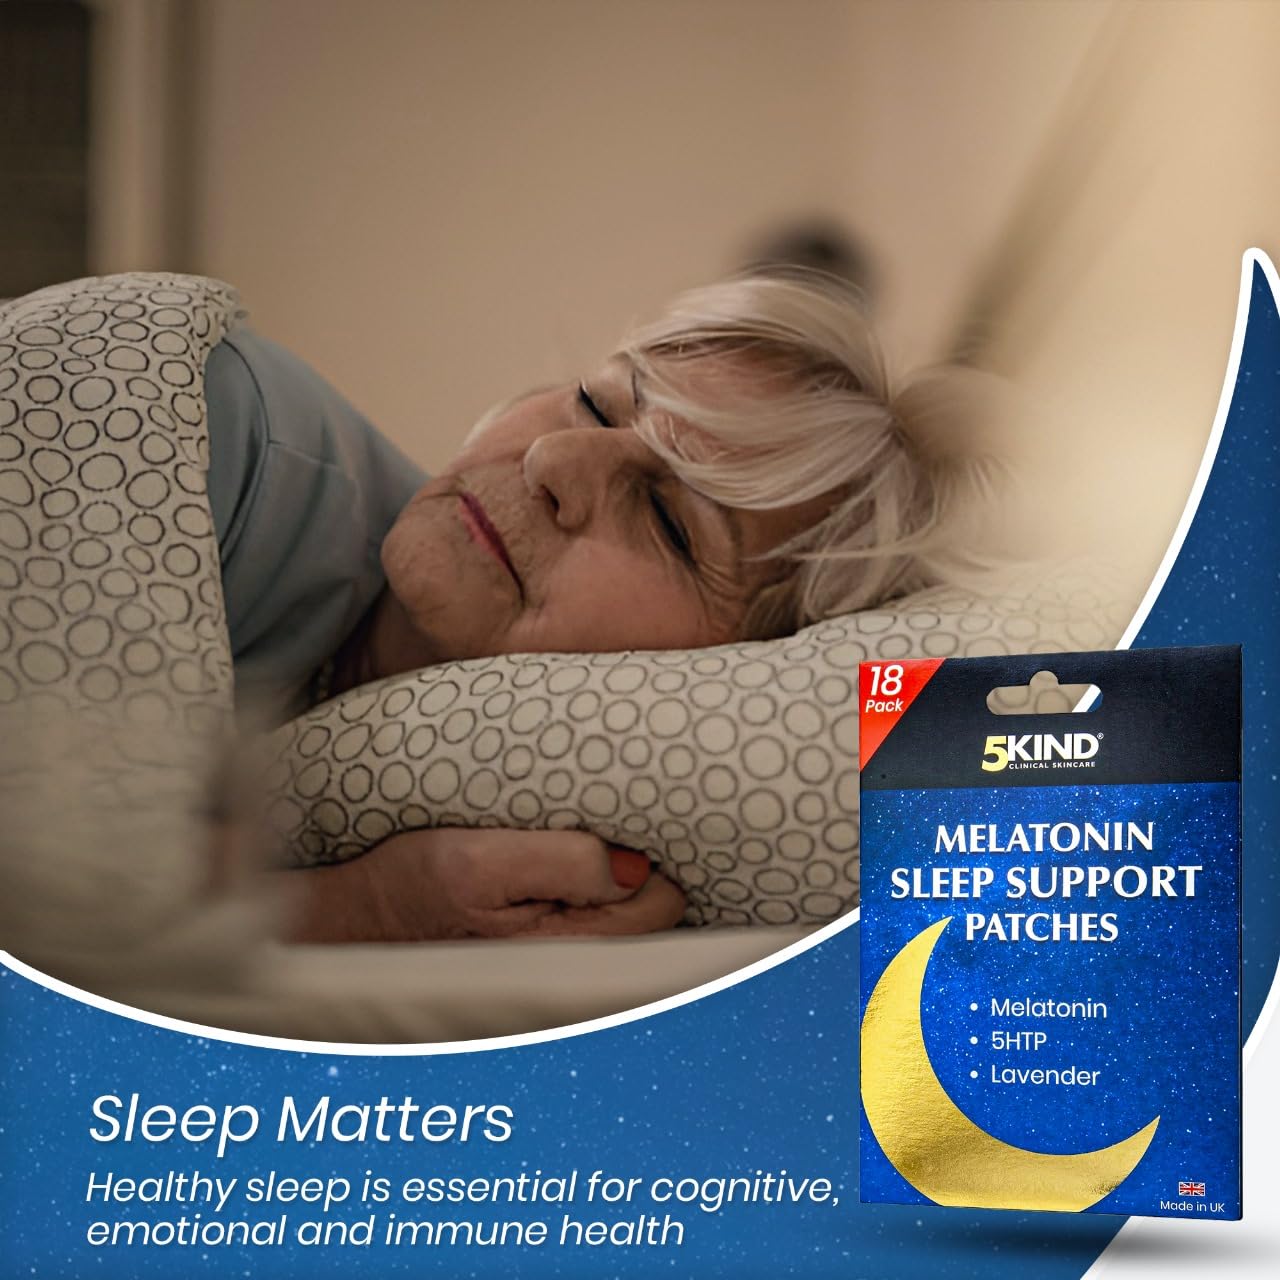 5Kind Melatonin Sleep Patches for Adults - Pack of 18 - High Strength Melatonin, 5HTP & Lavender in Every Patch - Melatonin Patches - Natural Sleep Patches - Made in UK